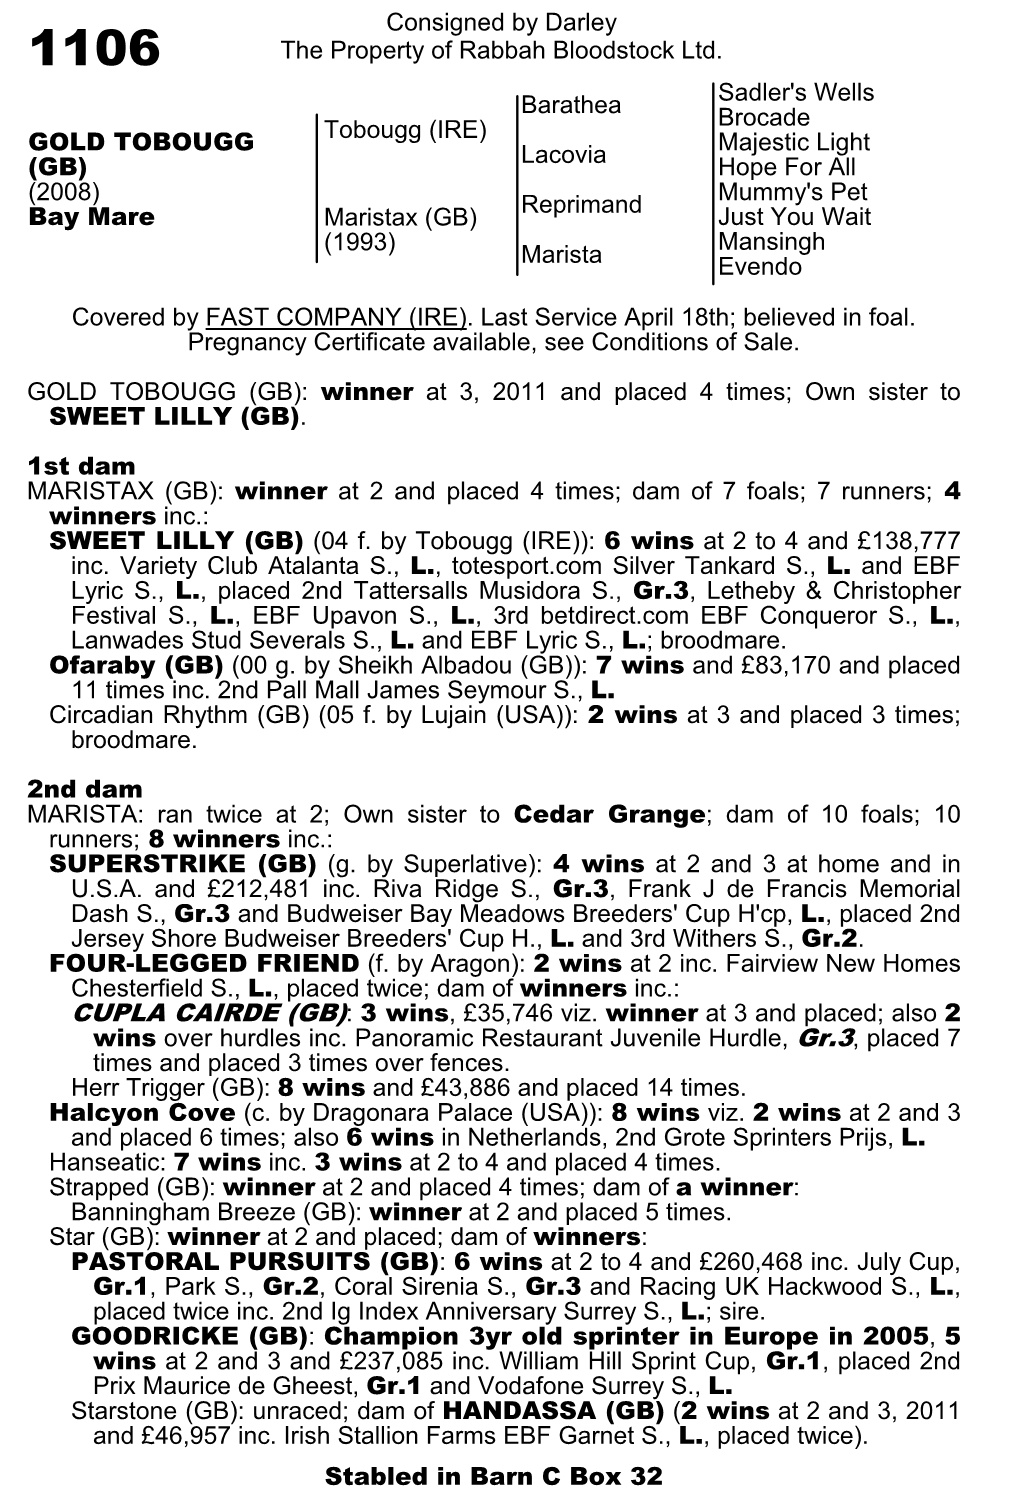 Consigned by Darley the Property of Rabbah Bloodstock Ltd. Barathea